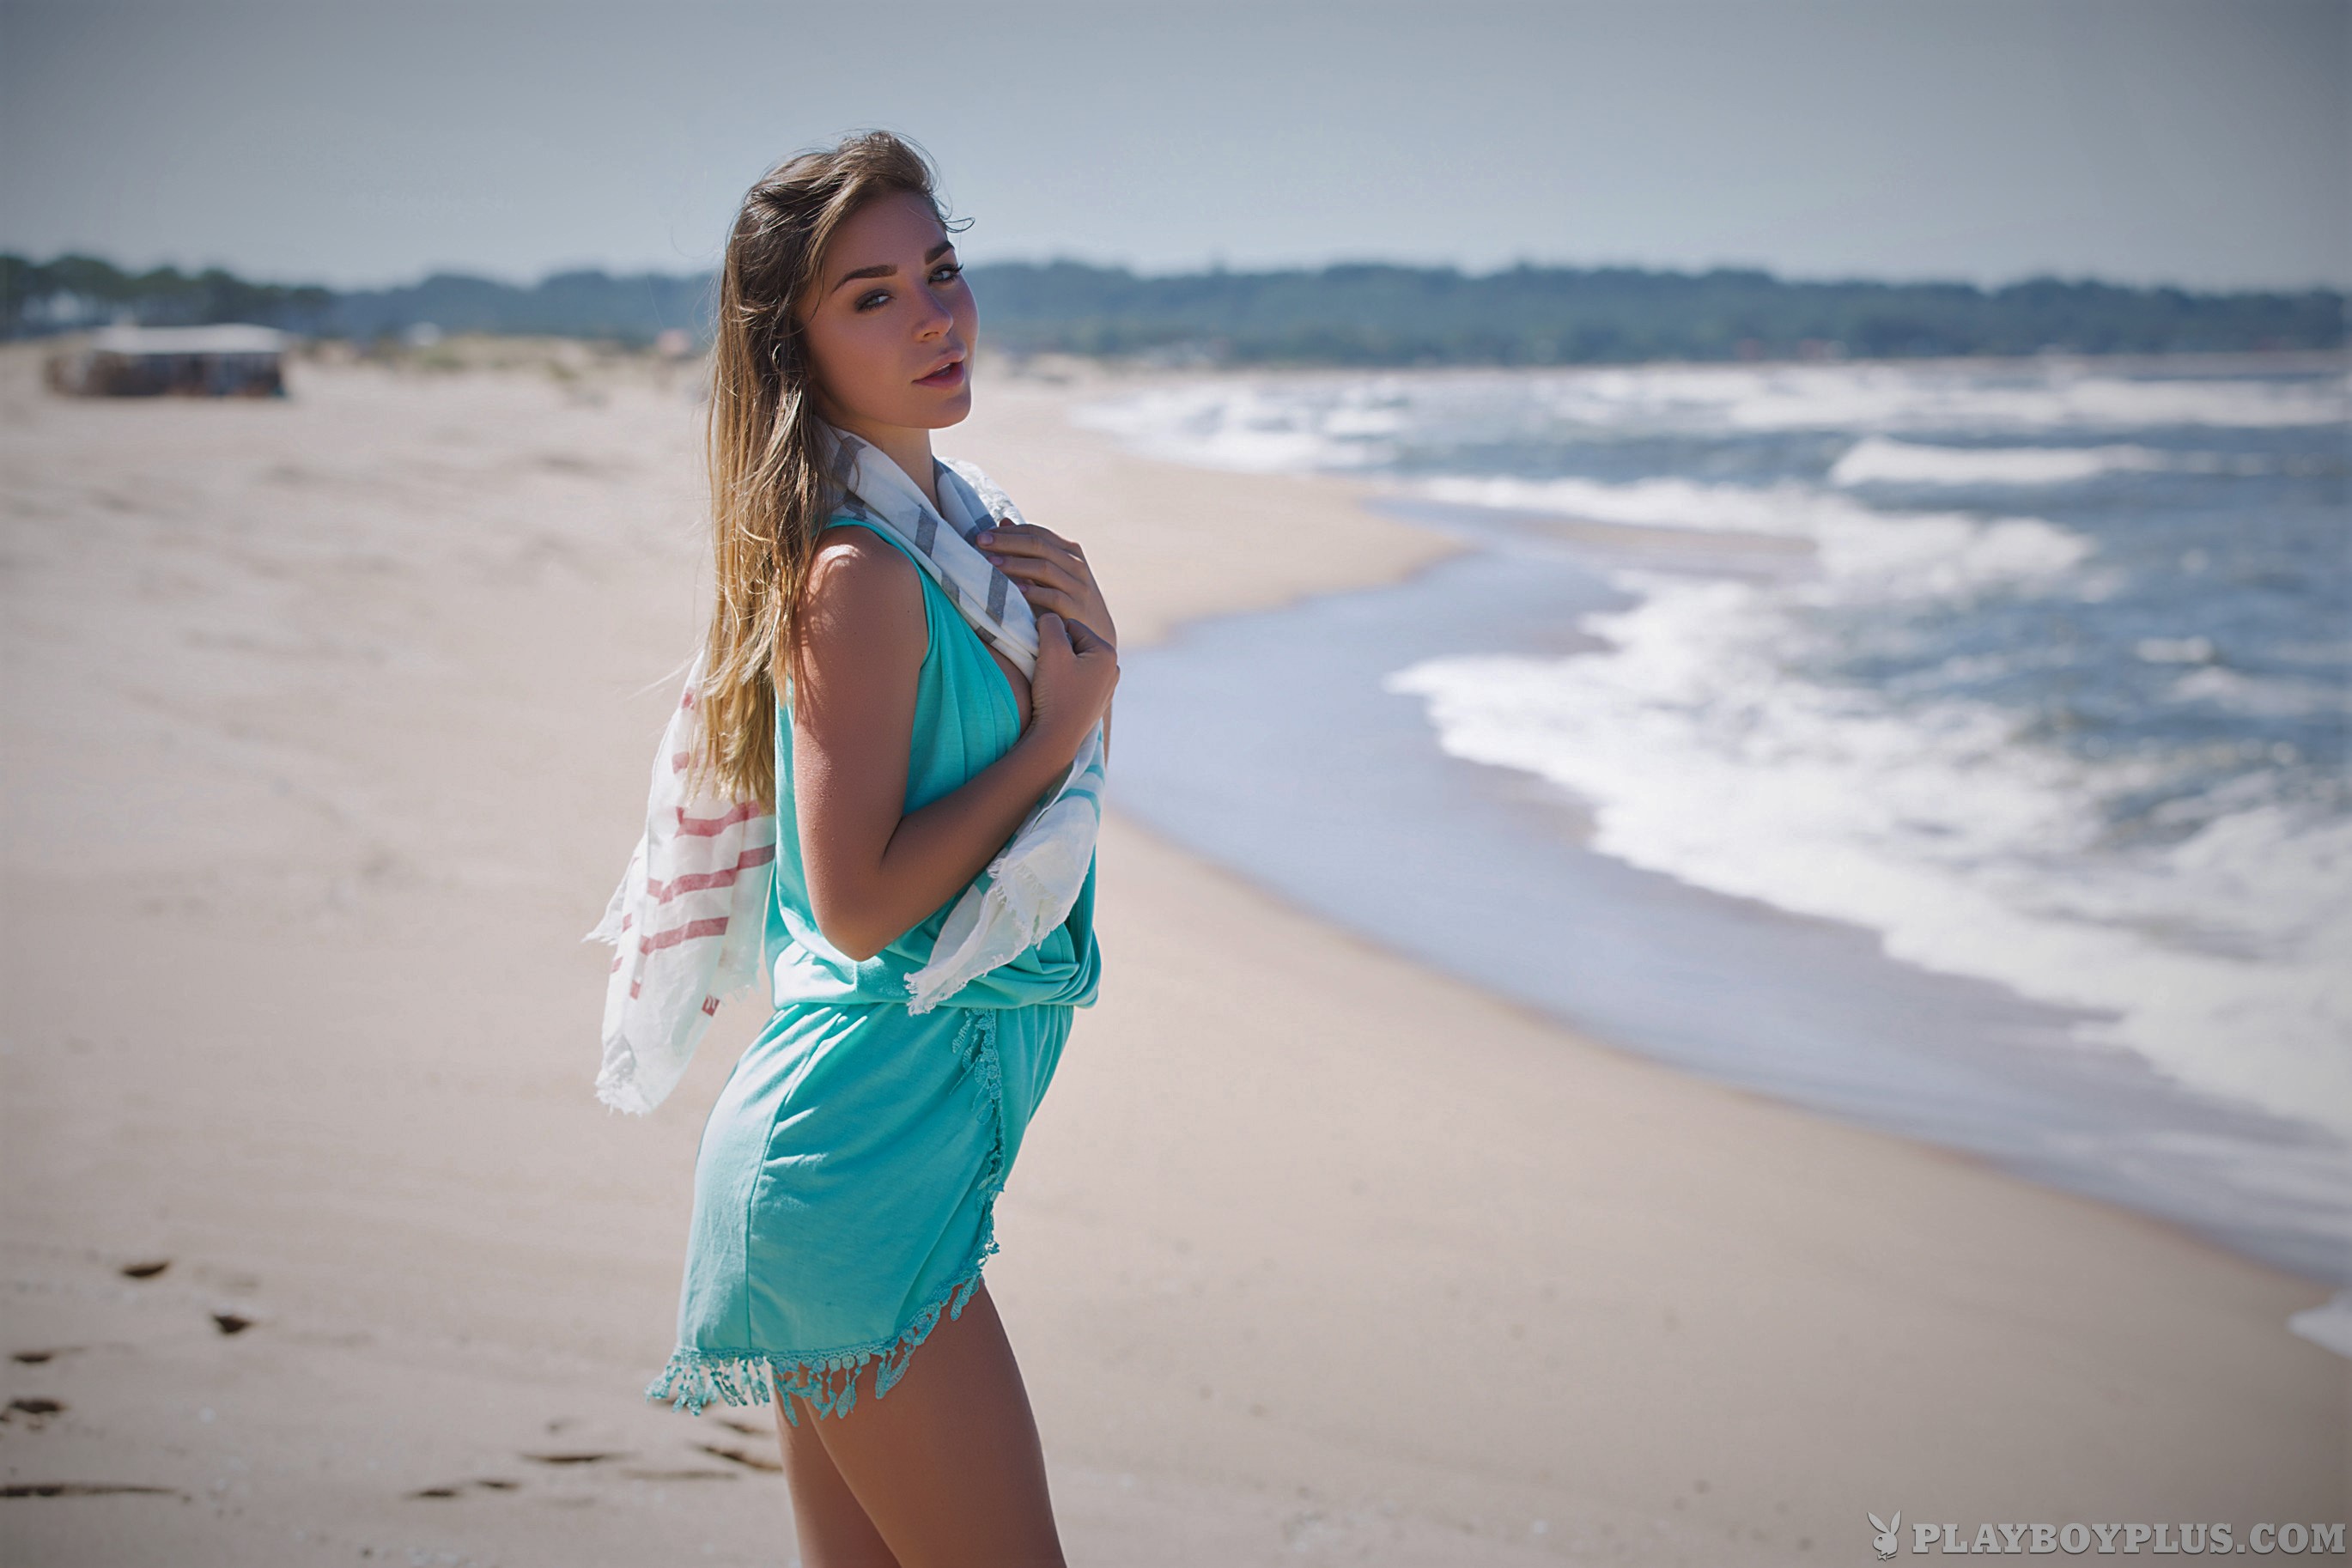 People 2739x1826 women beach Playboy Lily Chey blue dress women on beach Playboy Plus women outdoors watermarked outdoors model